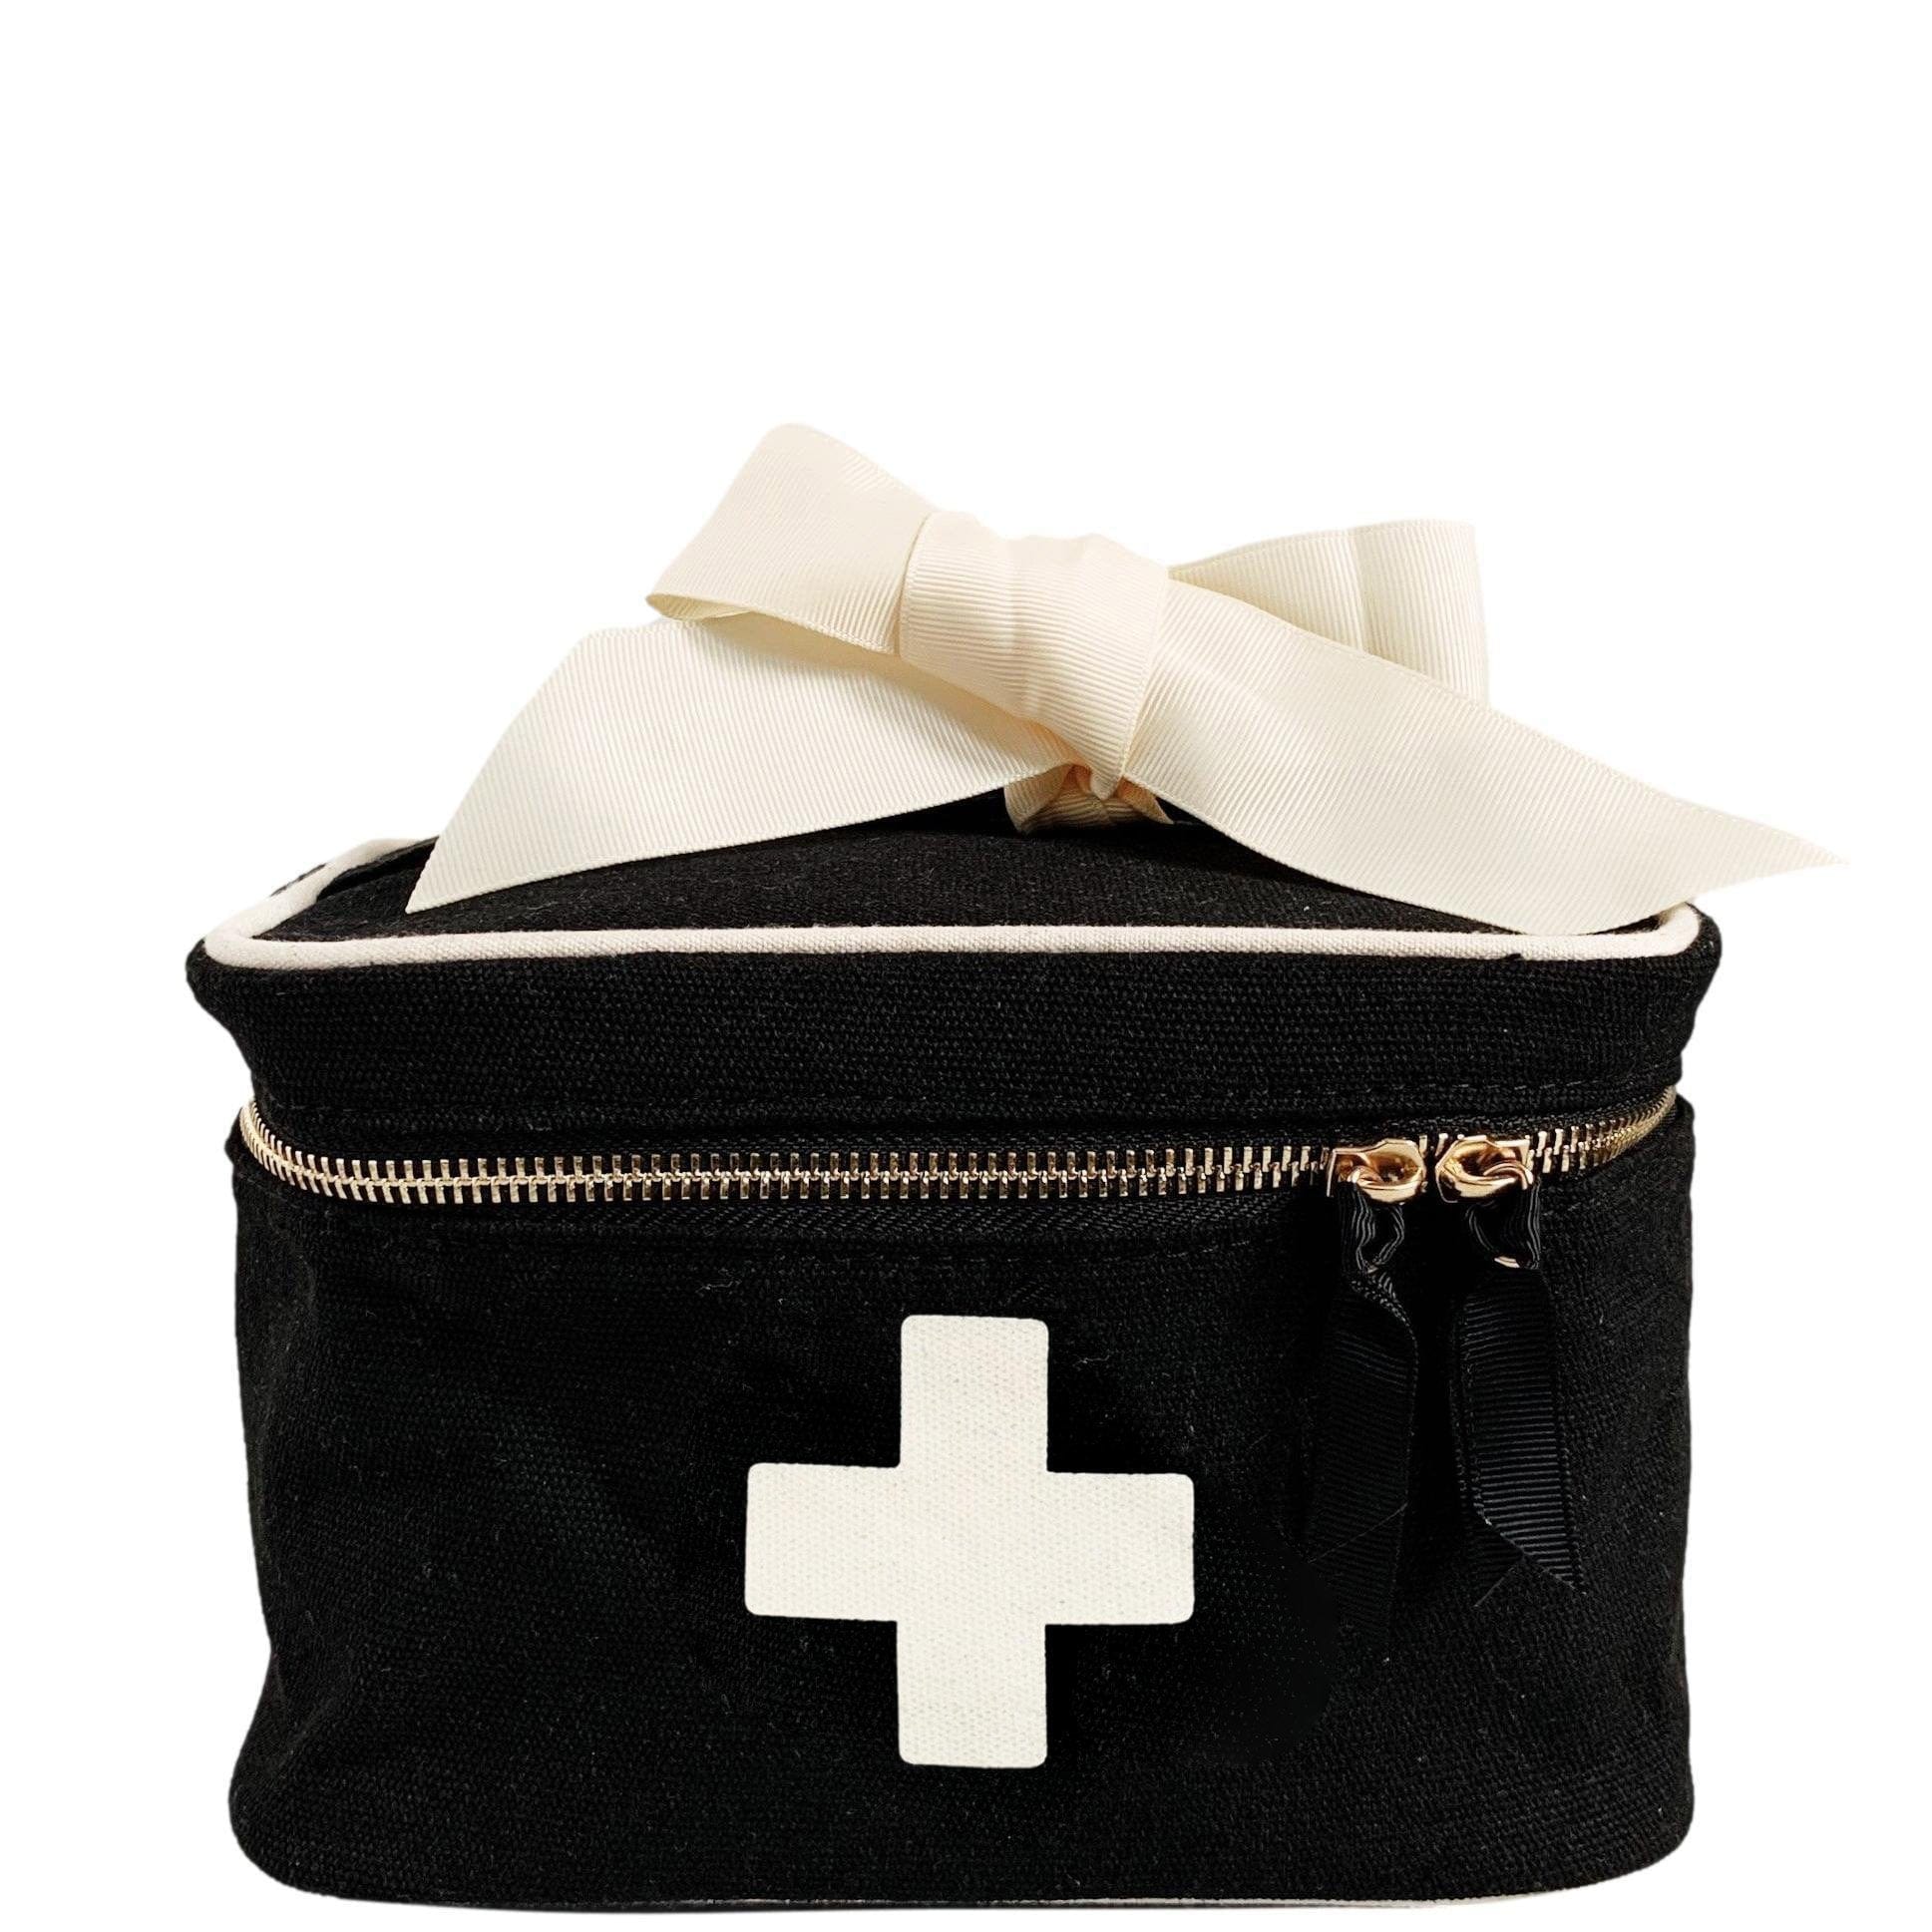 Meds and First Aid Storage Box, Black